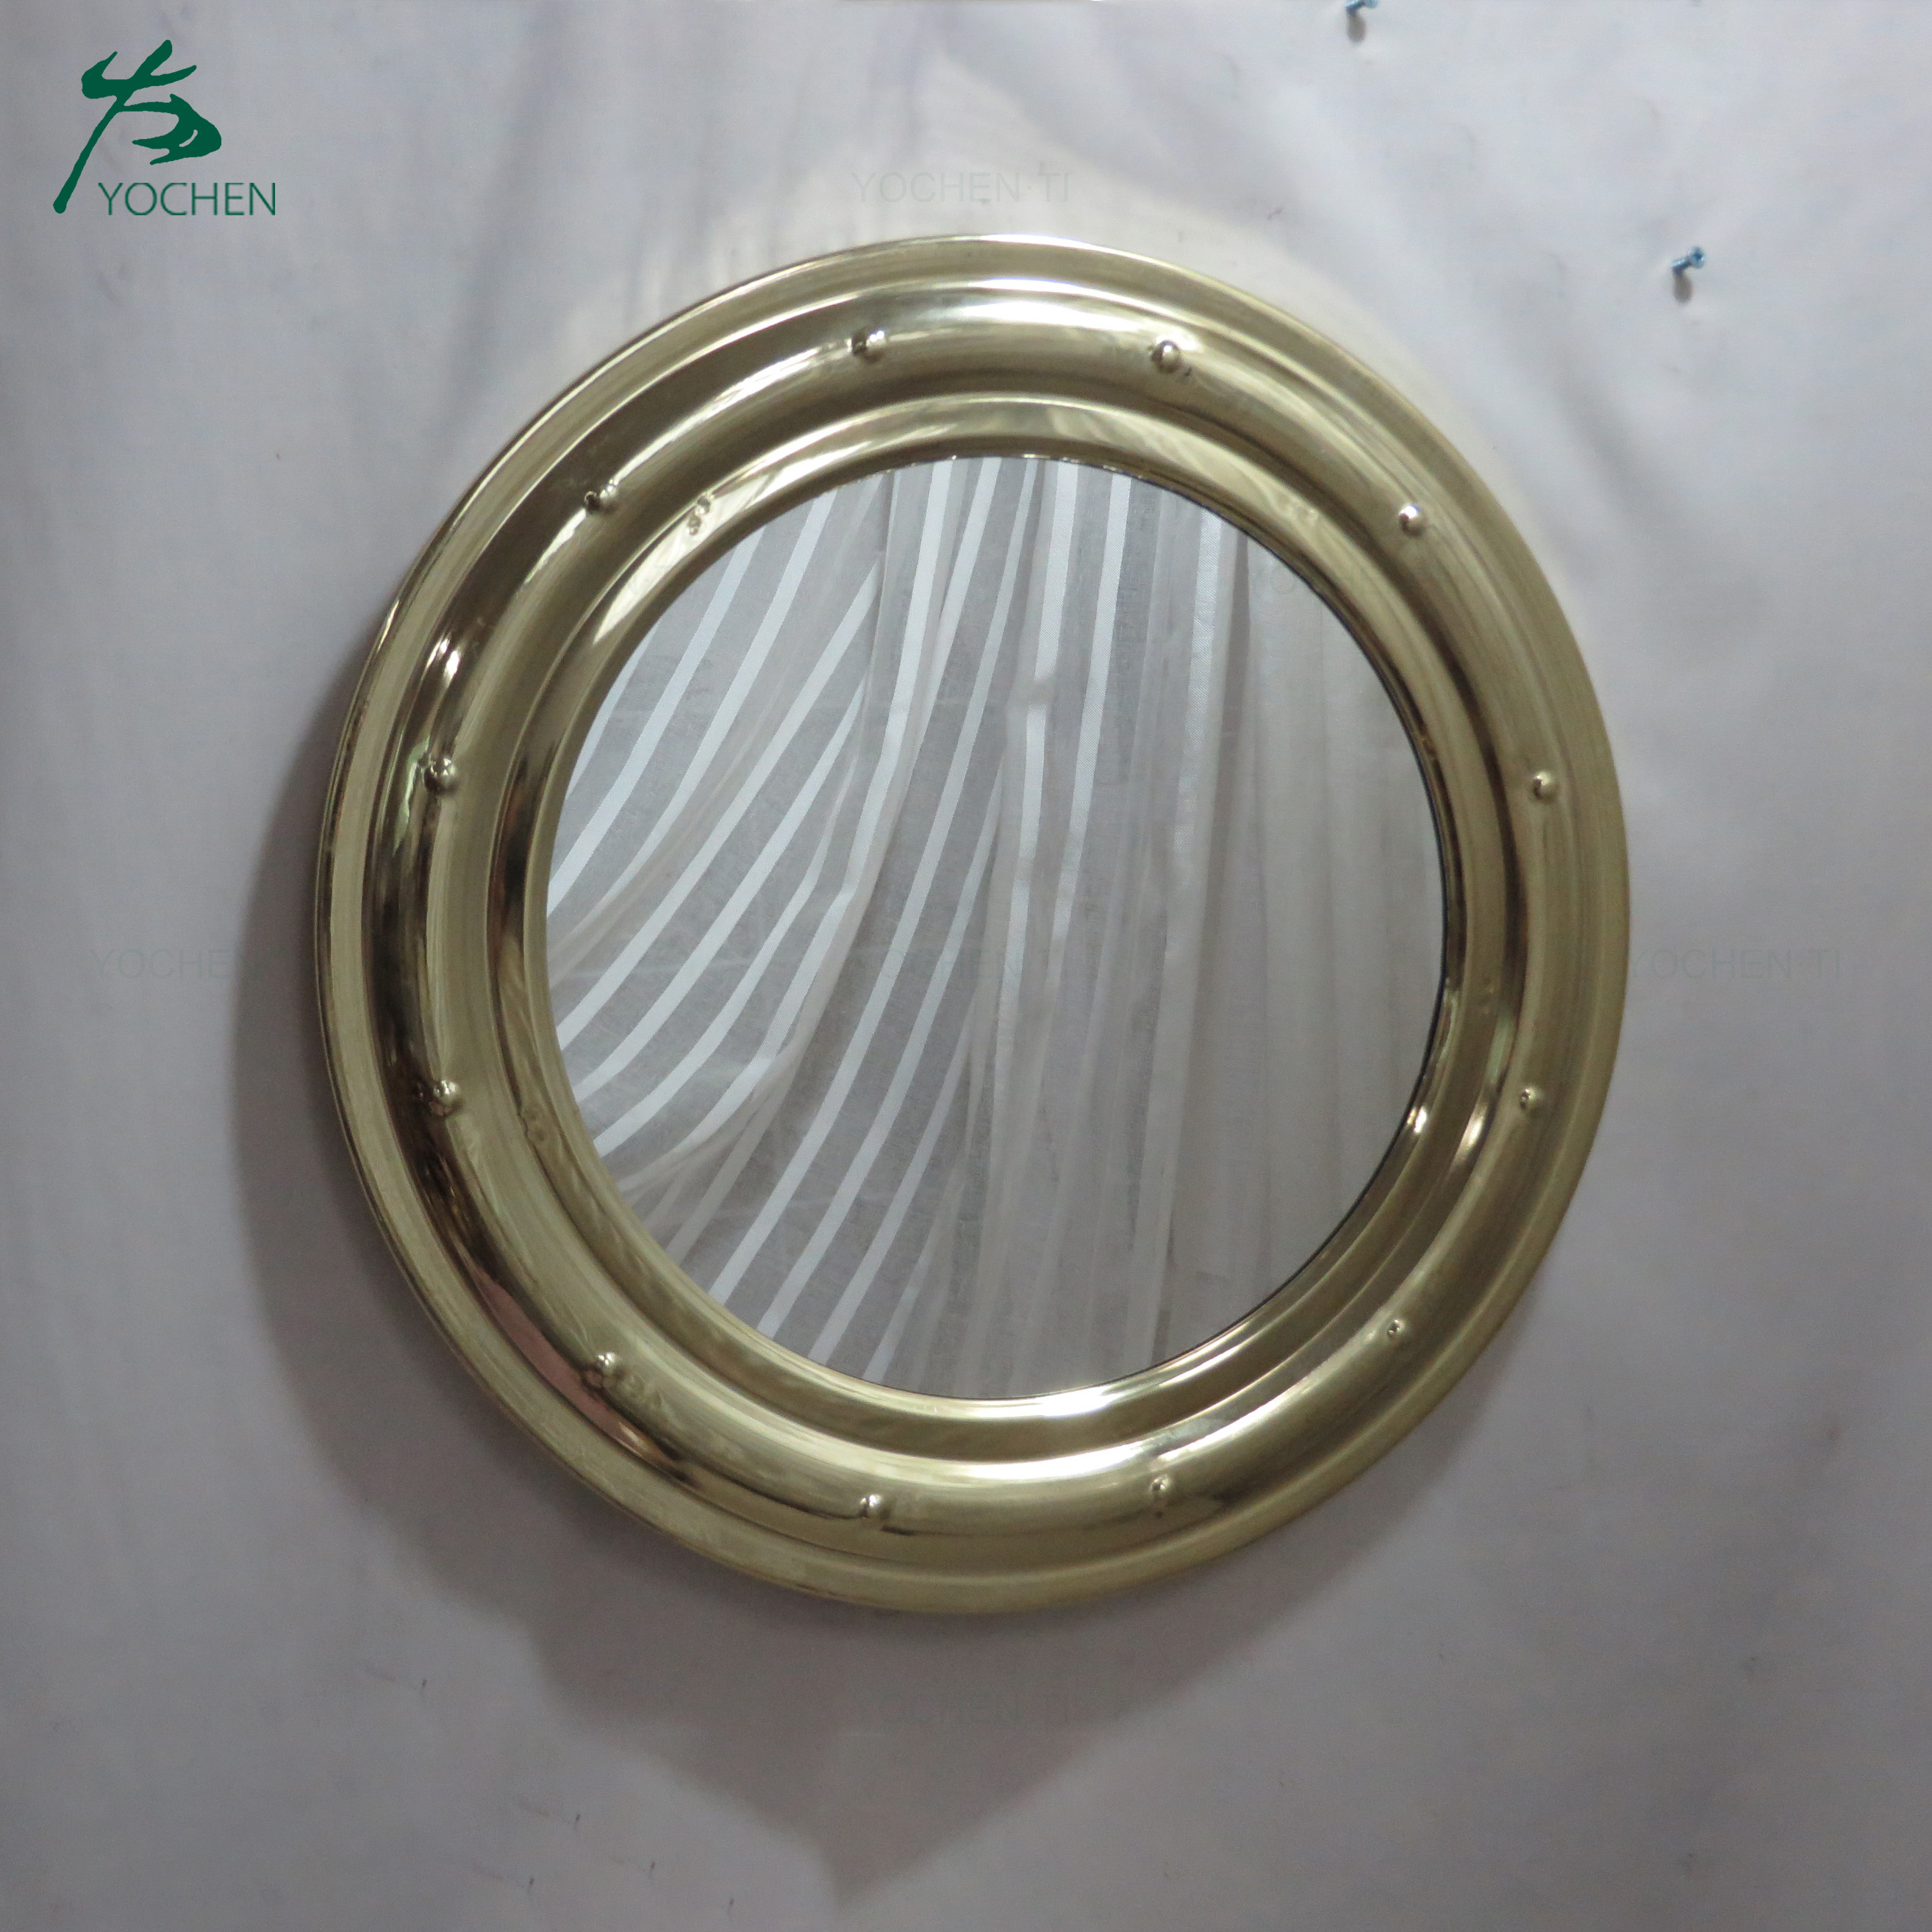 Antique decoration style gloden color round metal wall mirror